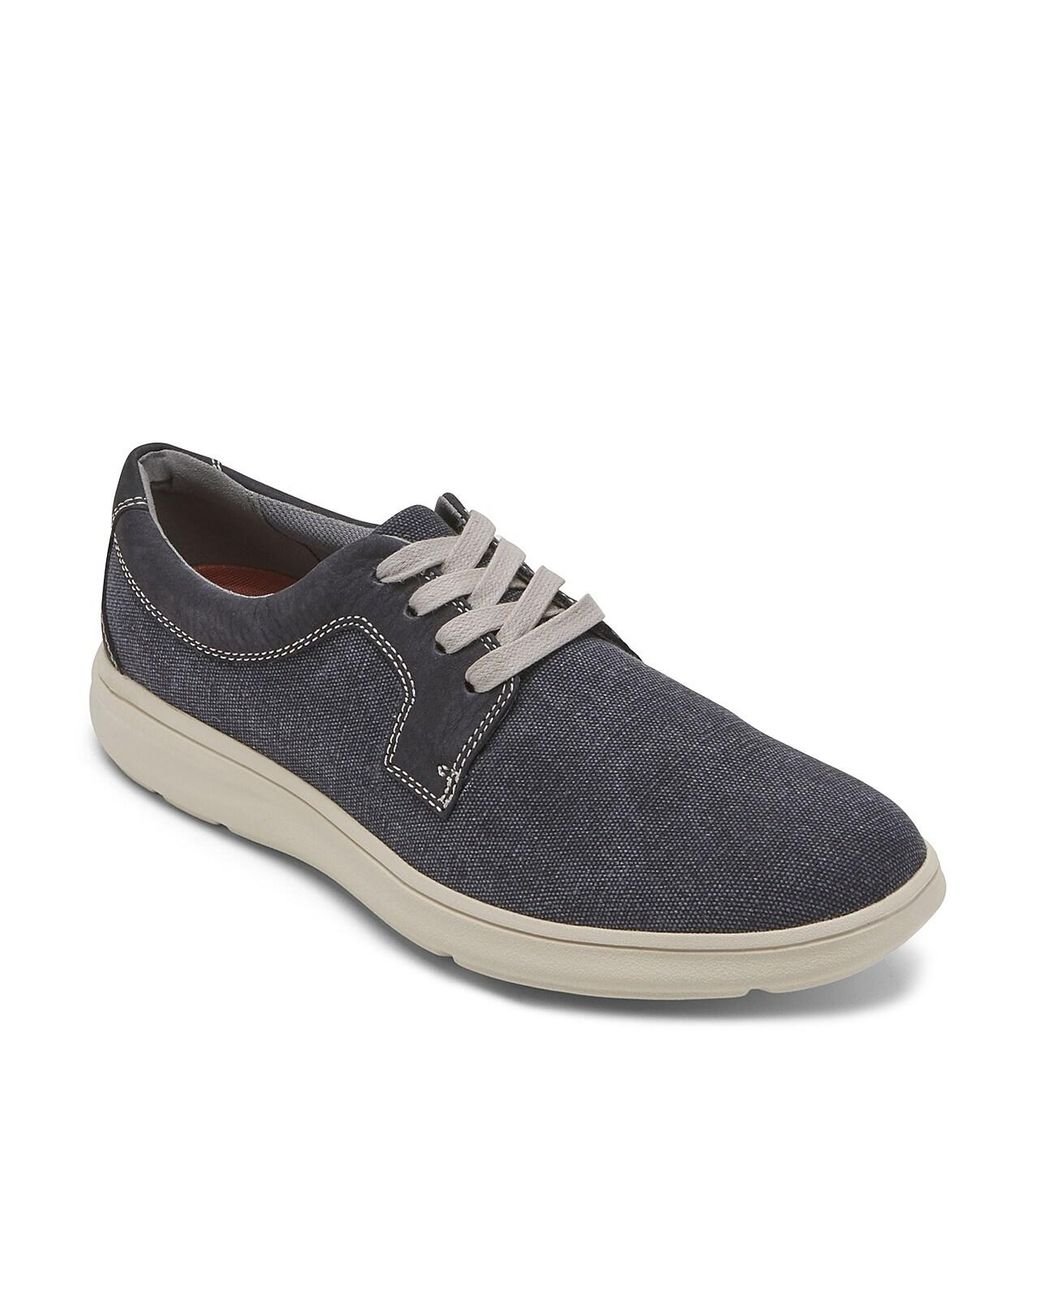 Rockport Canvas Beckwith Sneaker in Navy (Blue) for Men - Lyst